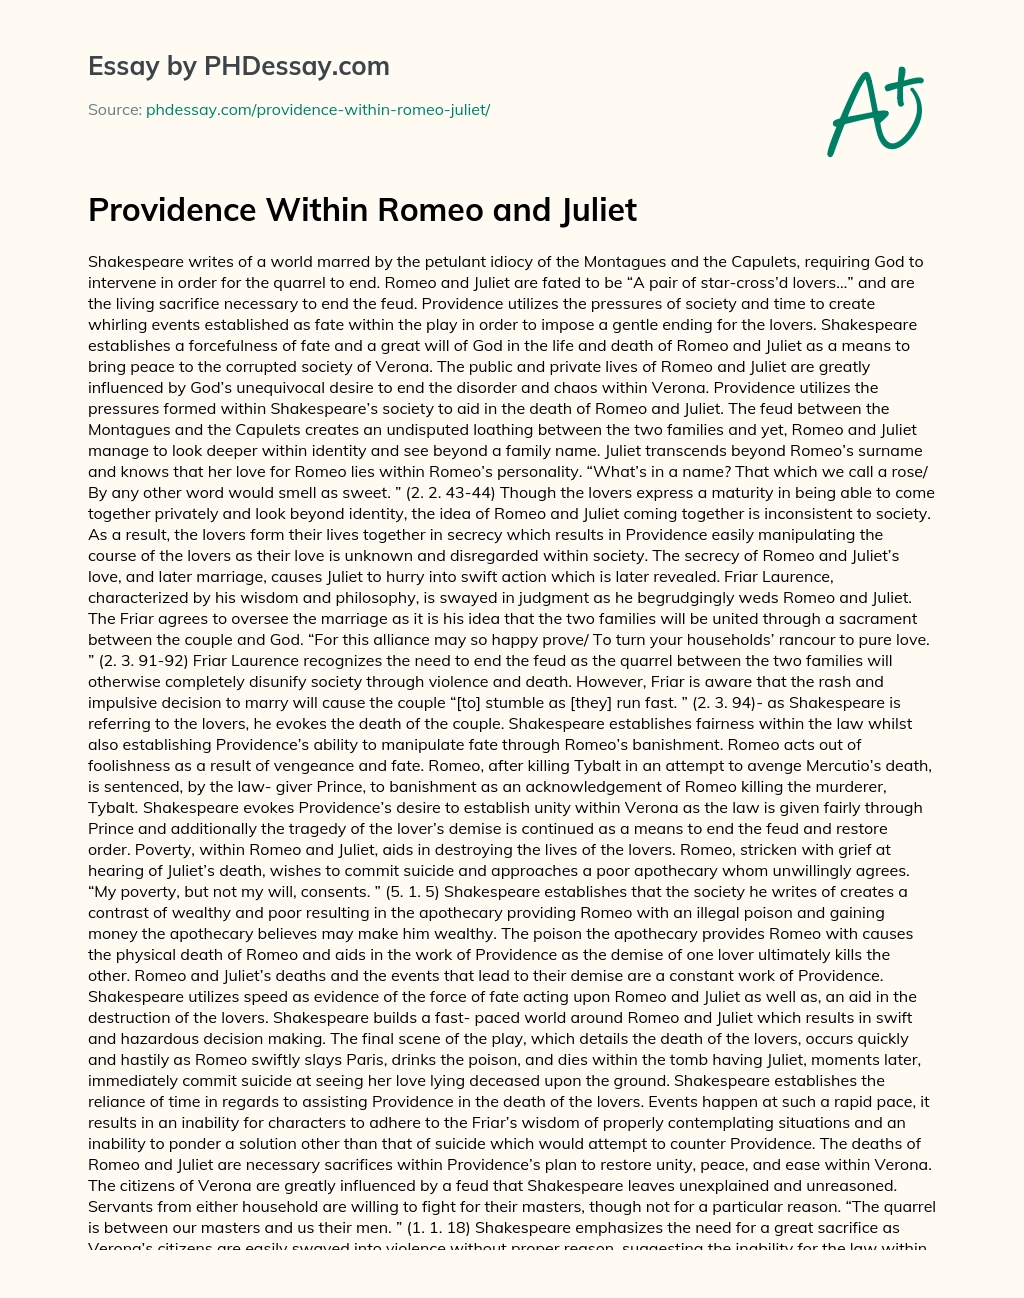 Providence Within Romeo and Juliet essay